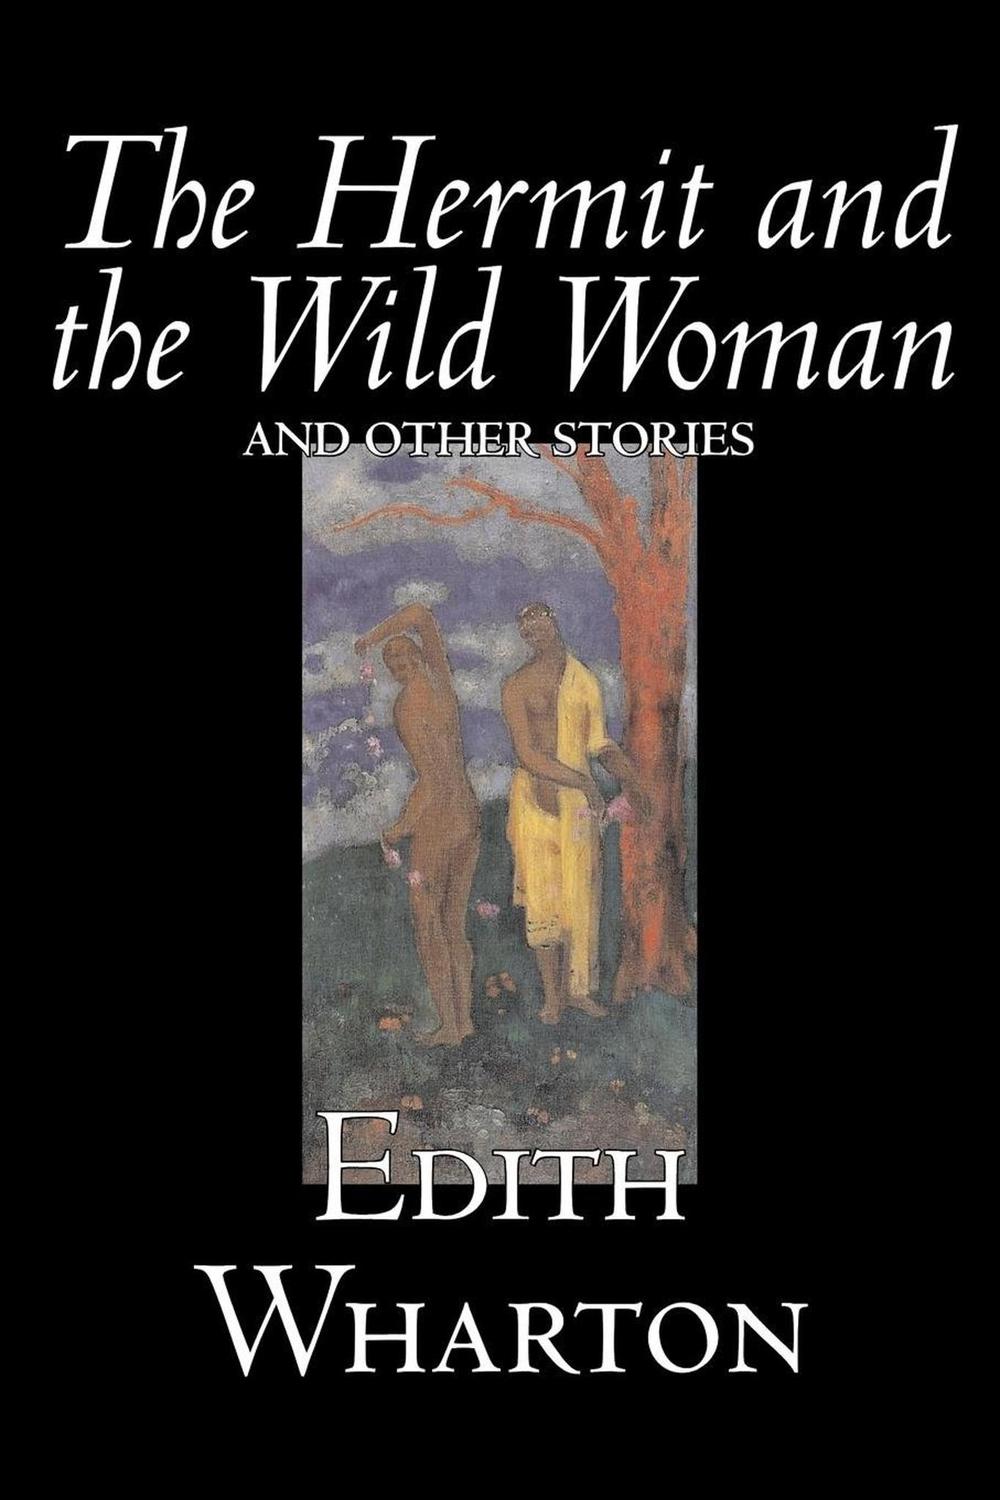 The Hermit and the Wild Woman and Other Stories - Edith Wharton,,